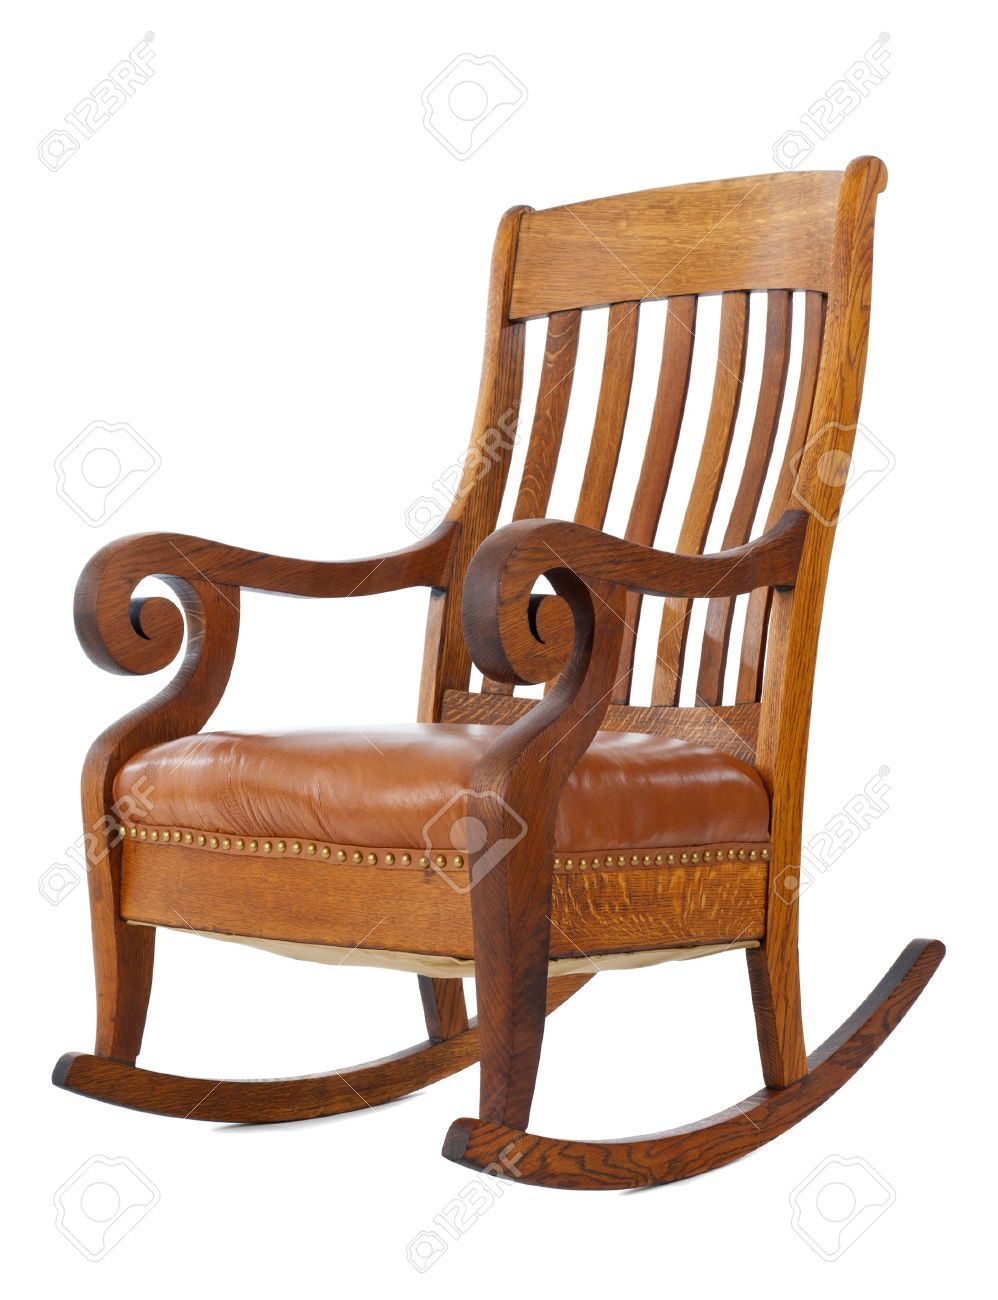 Antique Wooden Rocking Chair Isolated On White Background Pertaining To Antique White Wooden Rocking Chairs (Photo 8 of 20)